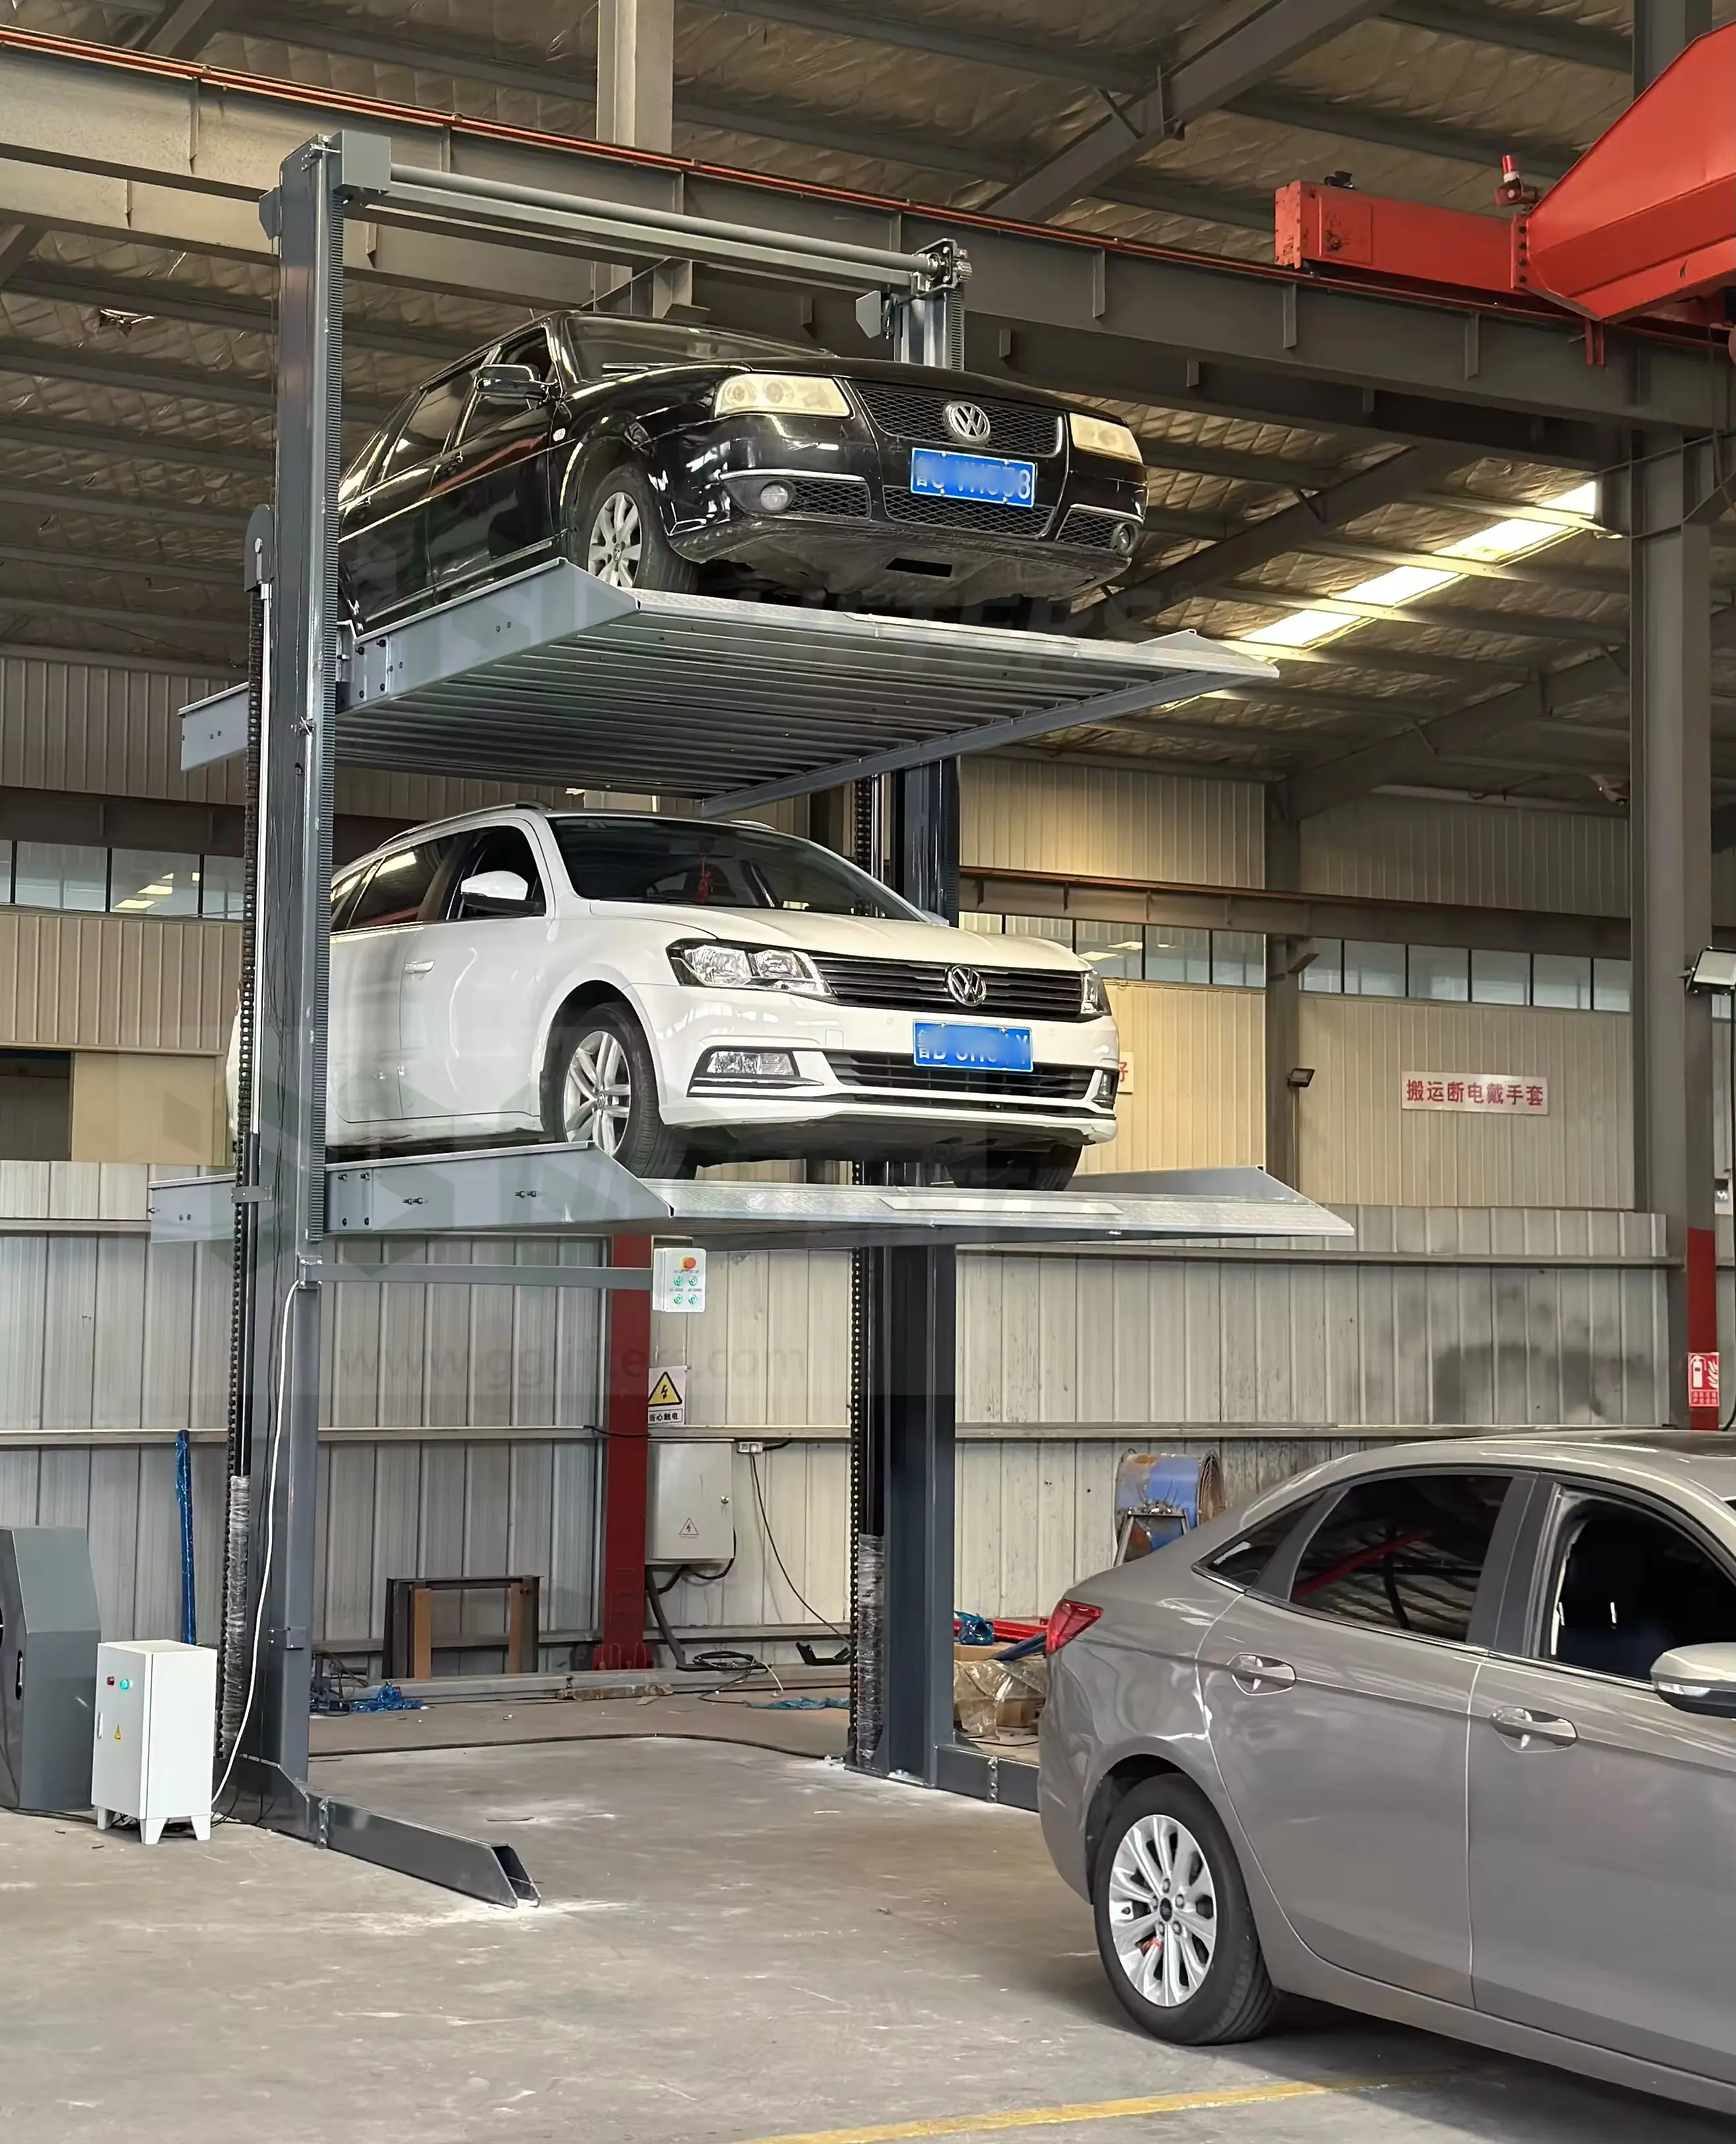 Two-Post Vertical Type Hydraulic Car Lifts Triple Floors Car Stack Parking System for Efficient Car Storage